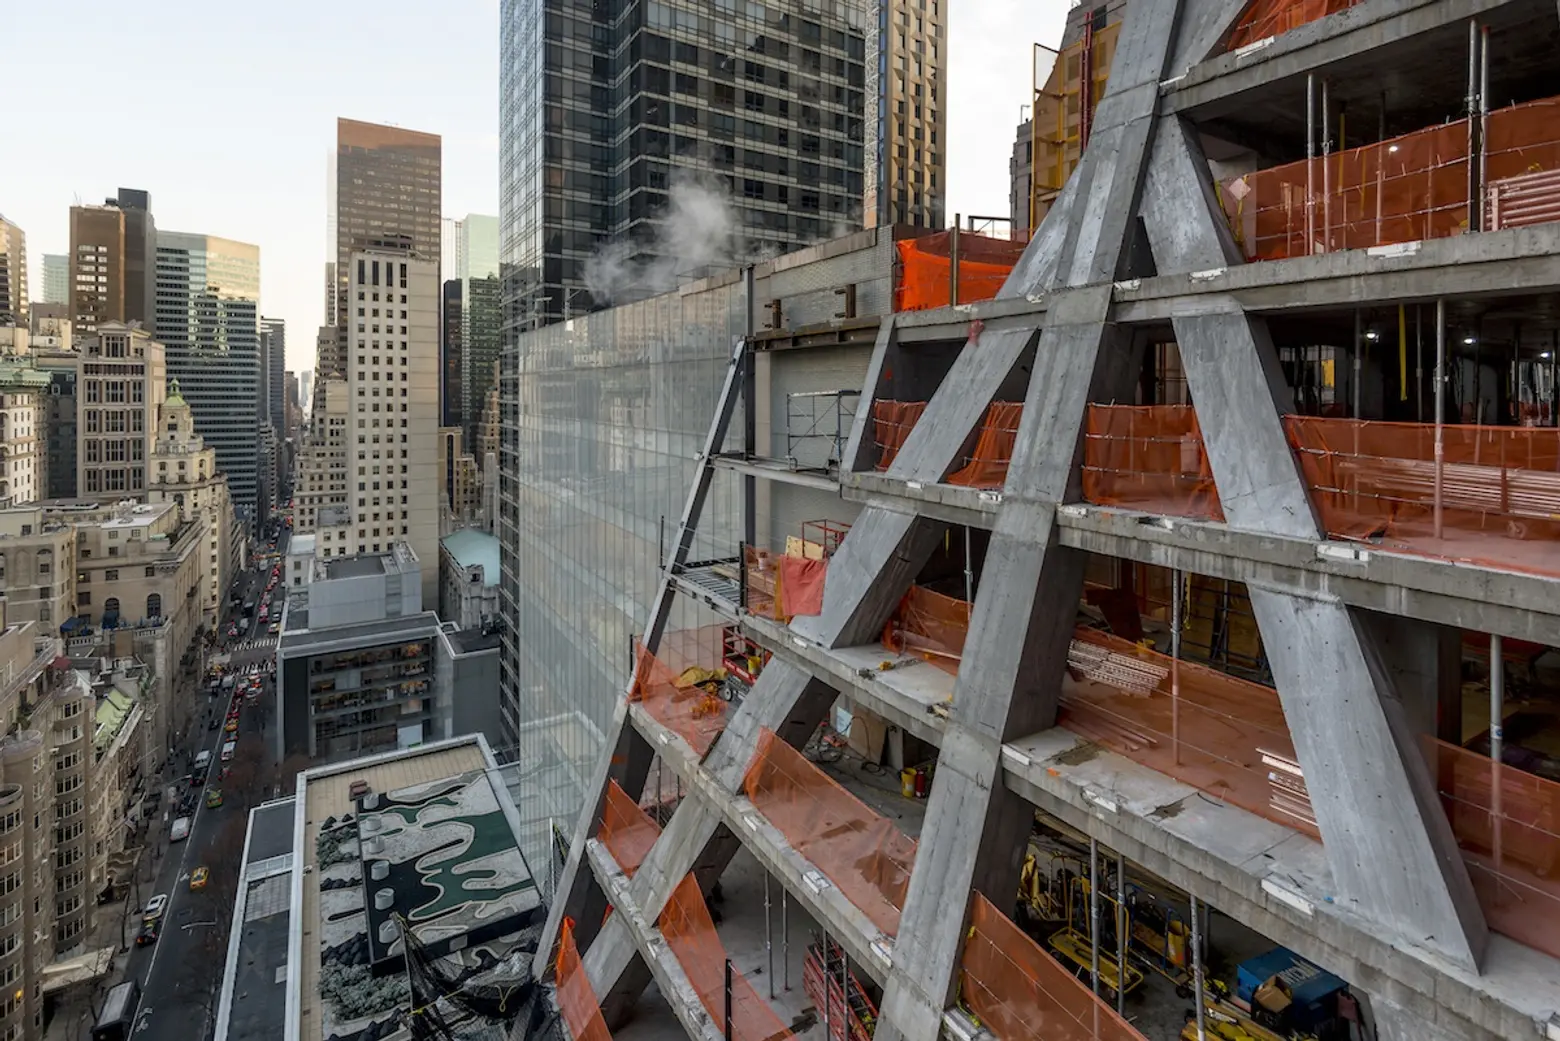 53W53, 53 West 53rd Street, MoMA Tower, Jean Nouvel, Thierry Despont, new developments, midtown west